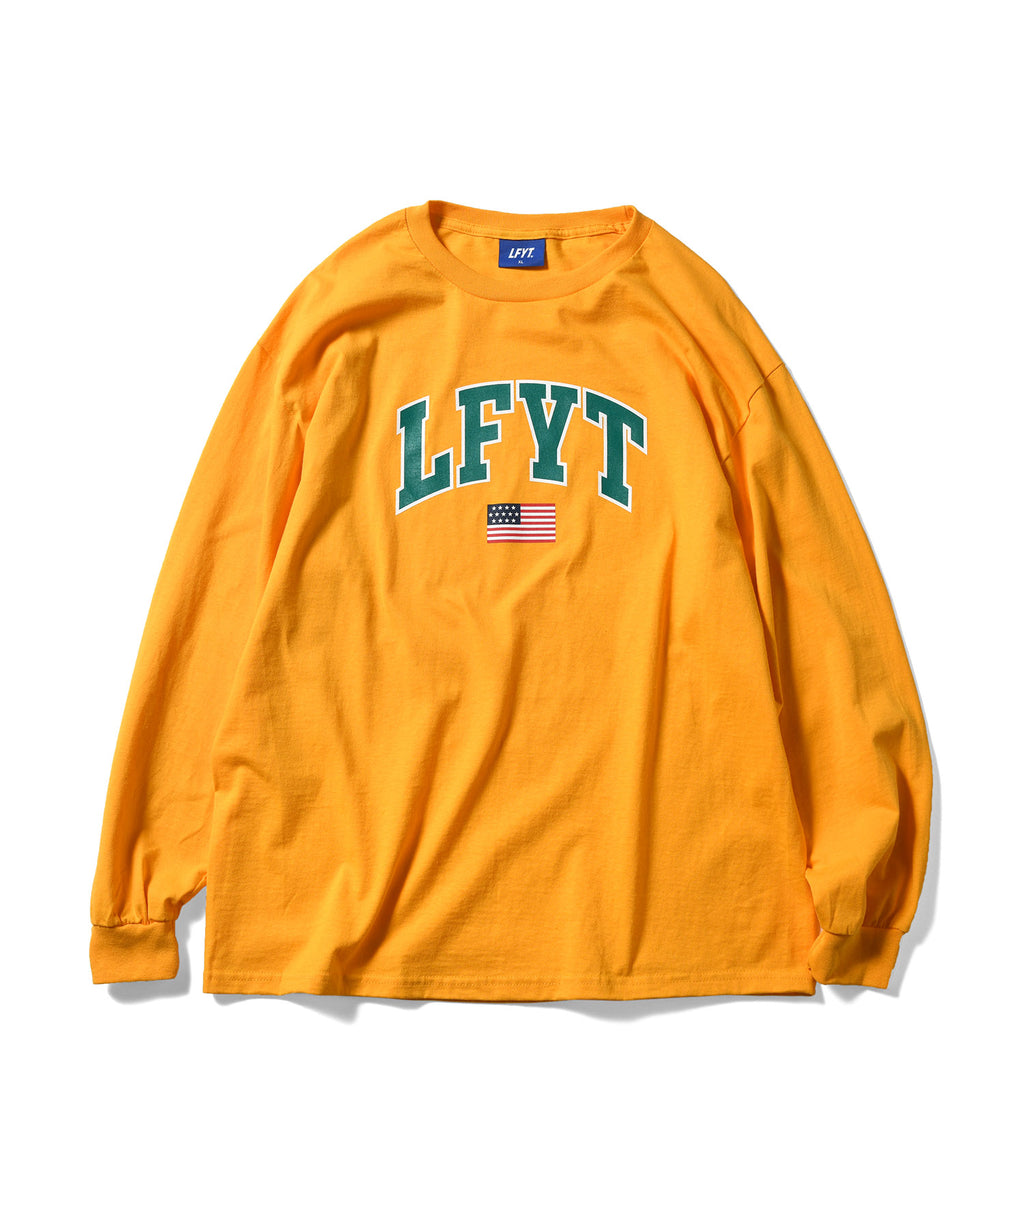 LFYT OLD GLORY ARCH LOGO L/S TEE LS220103 YELLOW